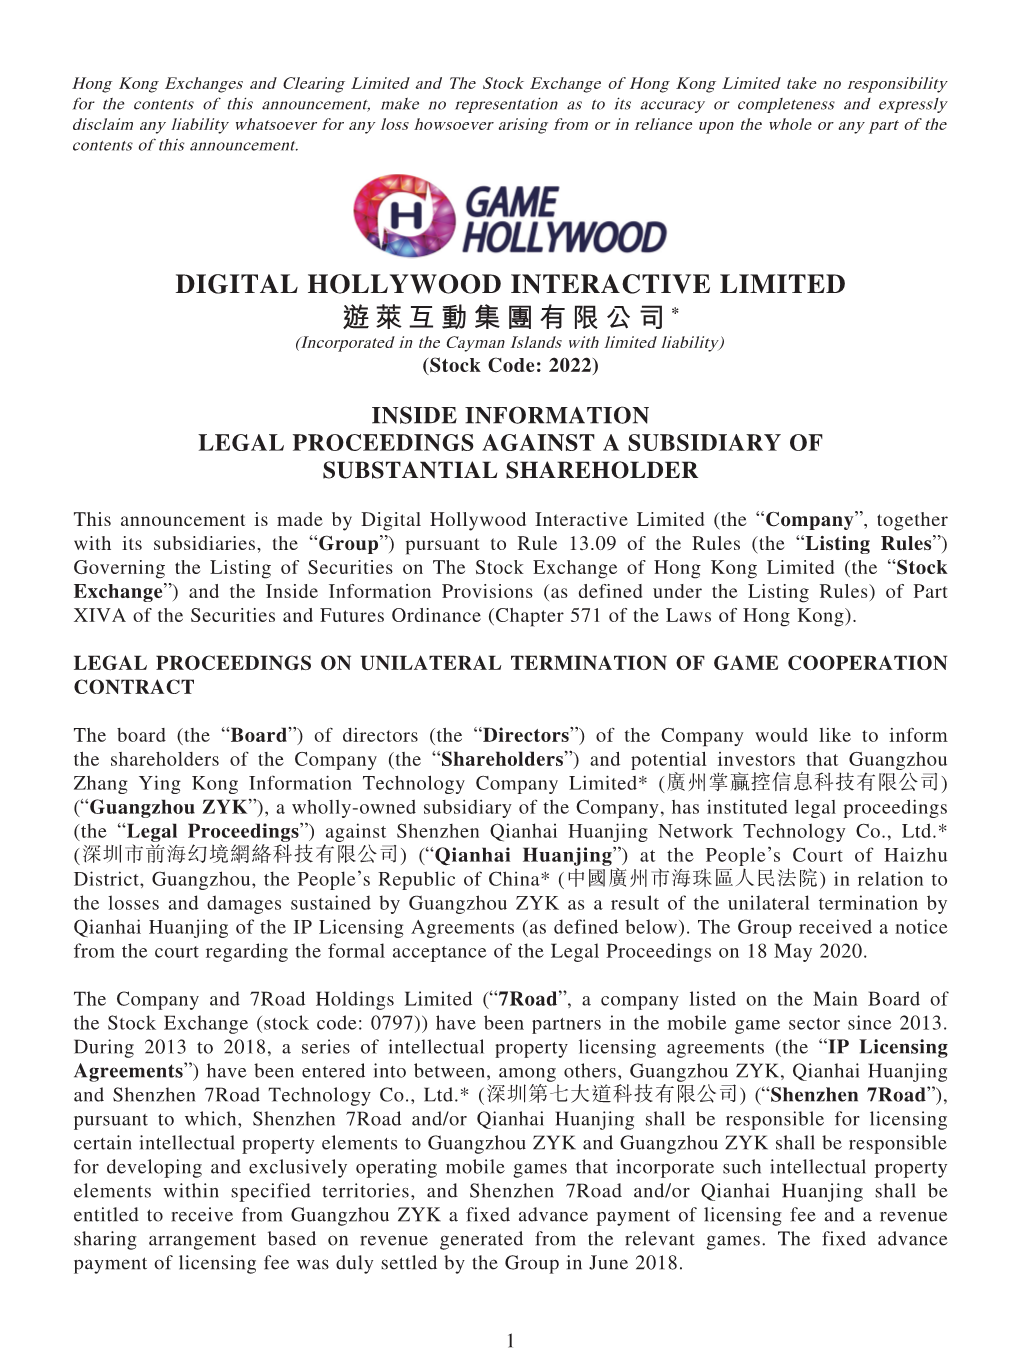 DIGITAL HOLLYWOOD INTERACTIVE LIMITED 遊萊互動集團有限公司* (Incorporated in the Cayman Islands with Limited Liability) (Stock Code: 2022)